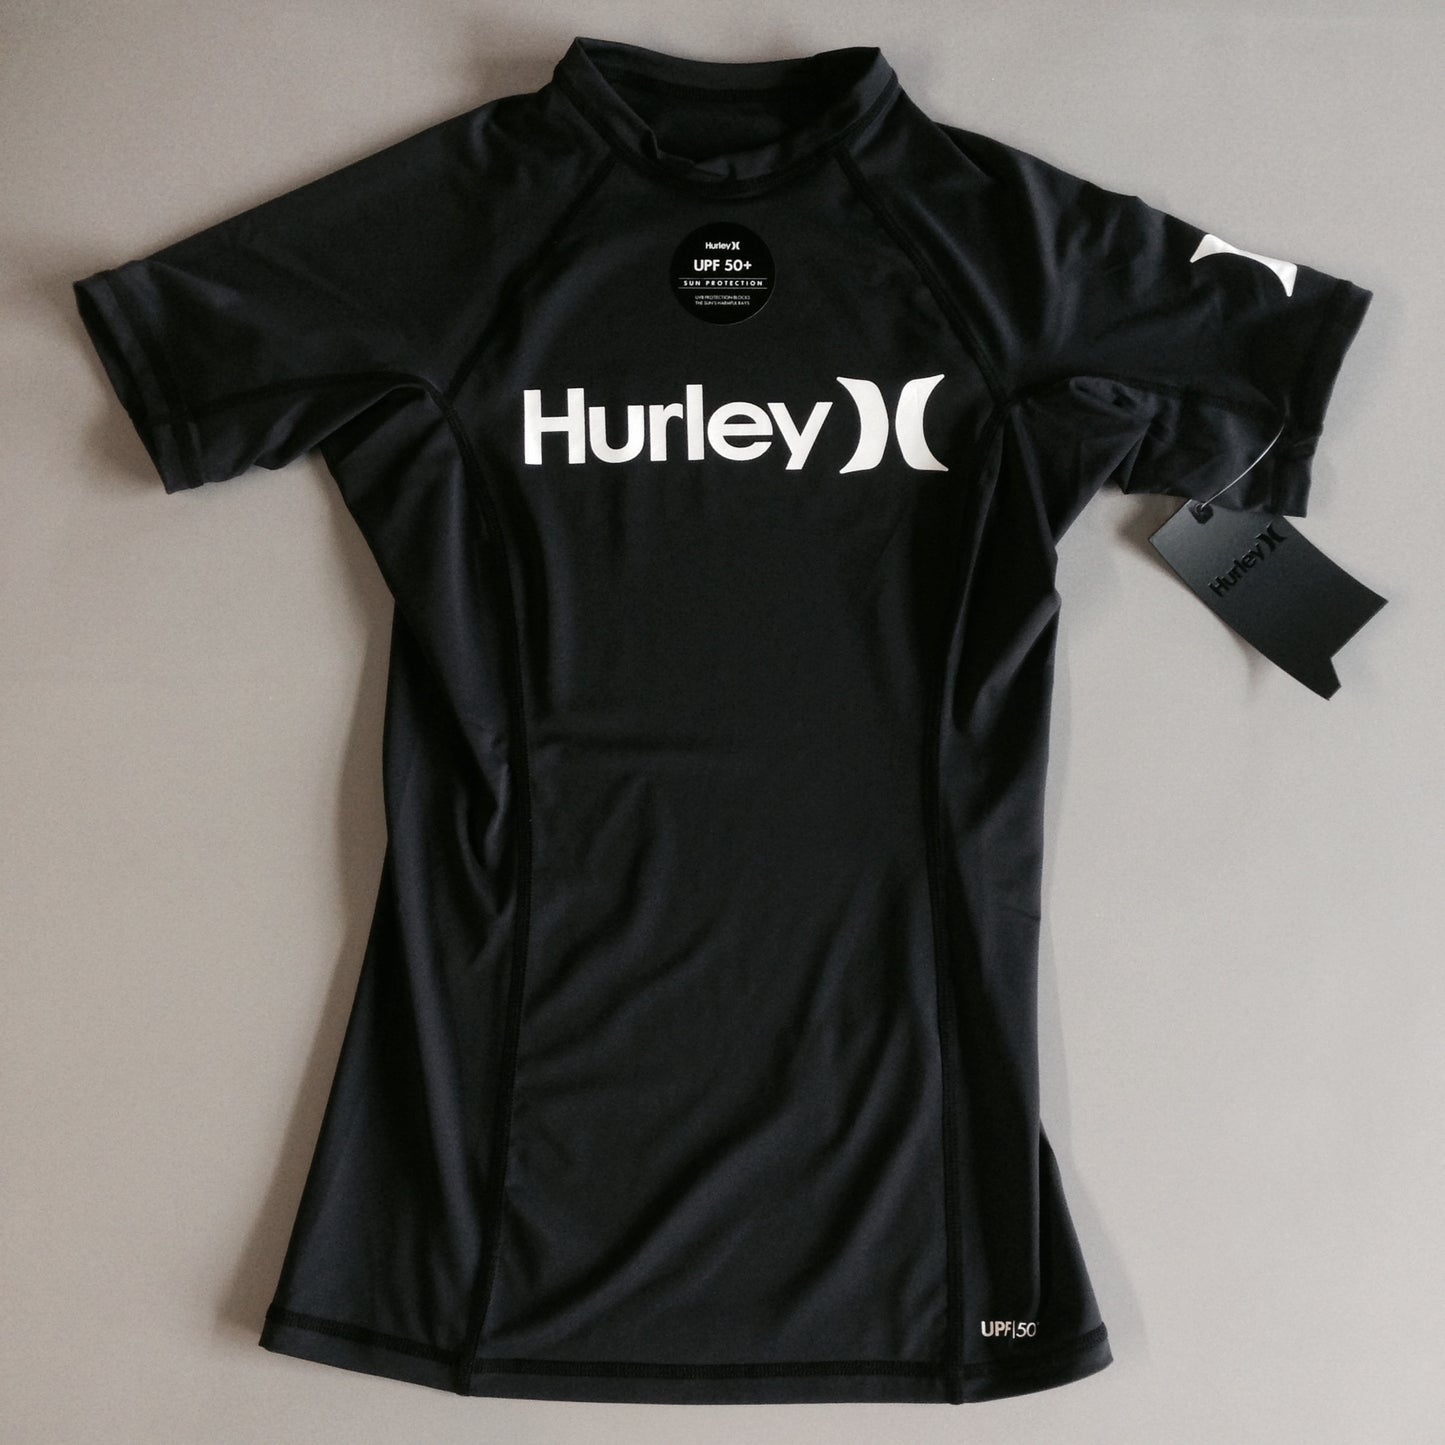 Hurley Women's One And Only Short Sleeve Rashguard